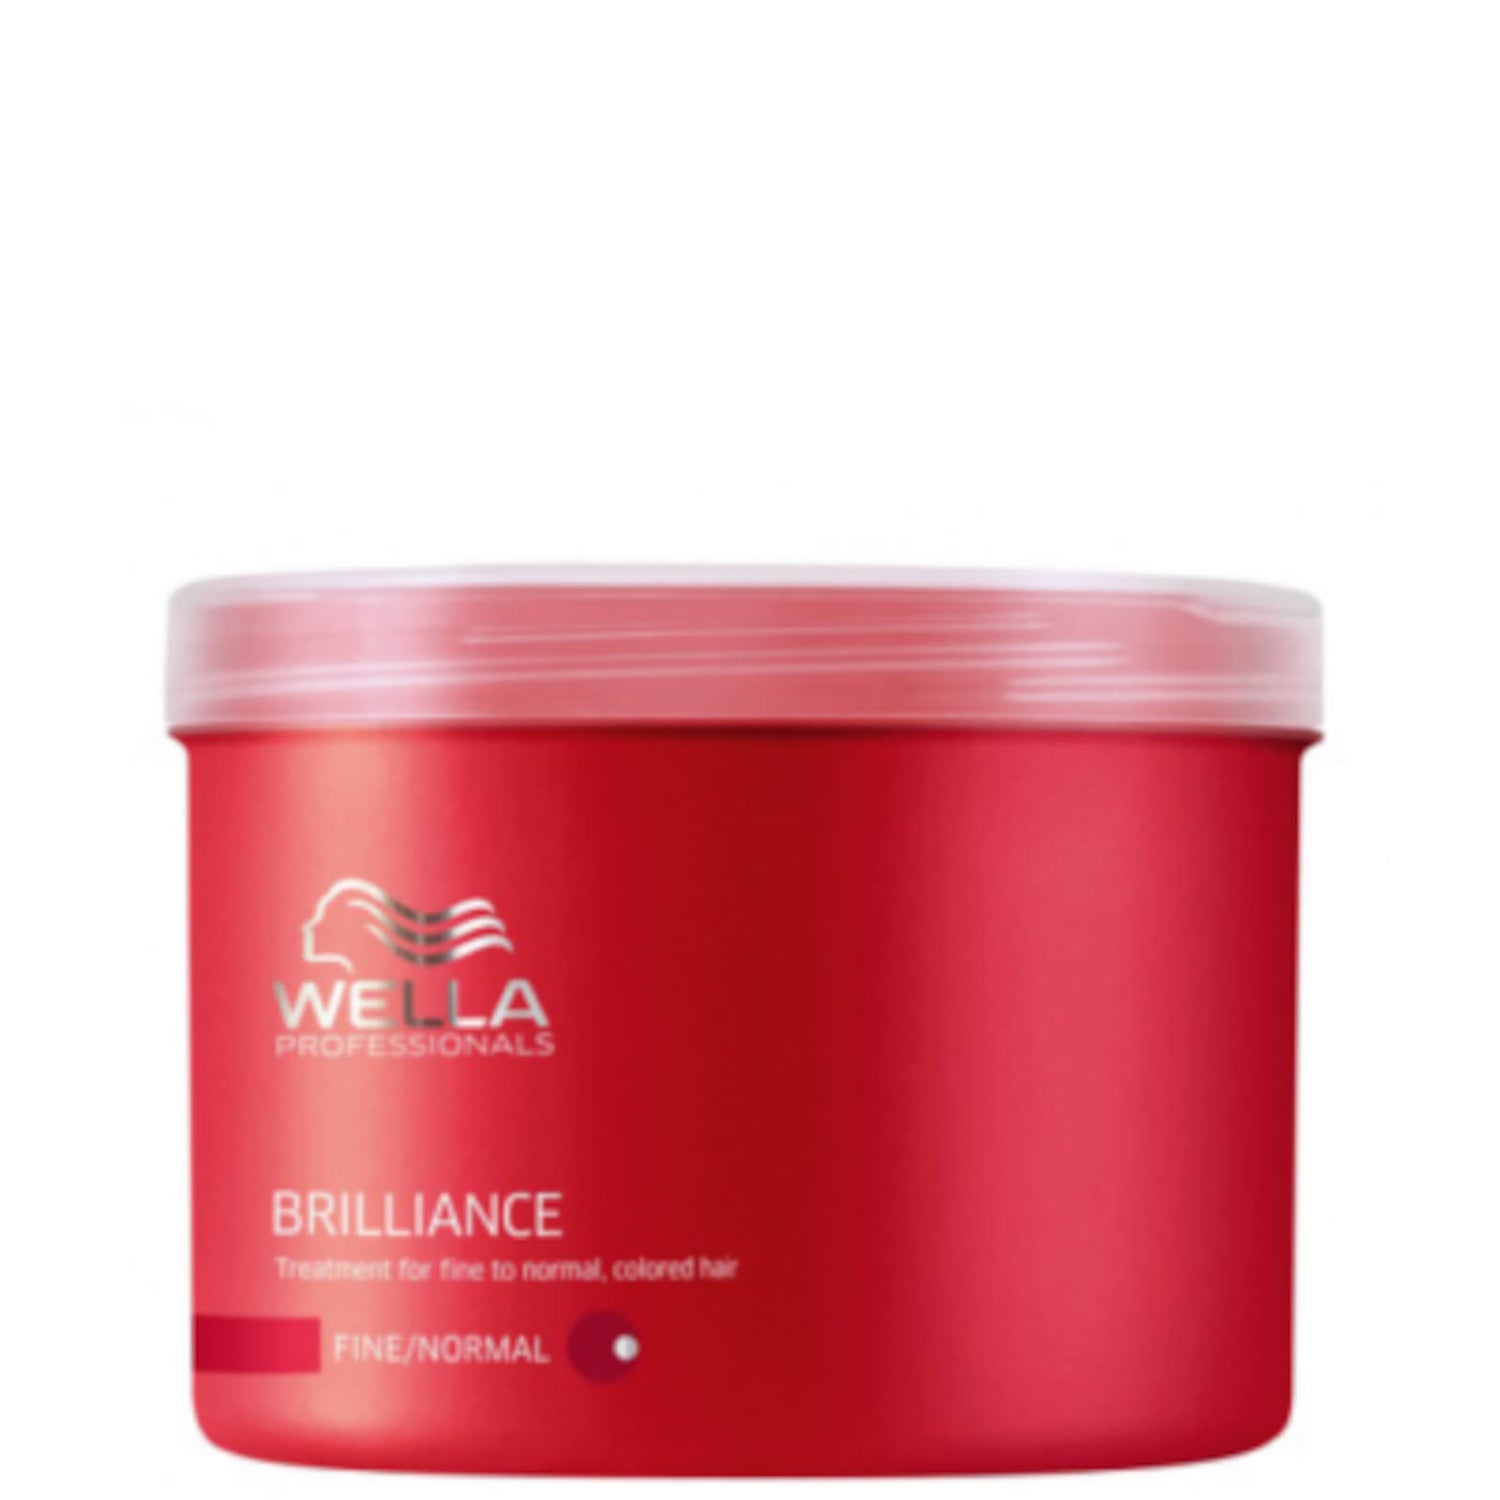 Wella Professionals Brilliance Treatment For Fine To Normal, Colored Hair (17oz)